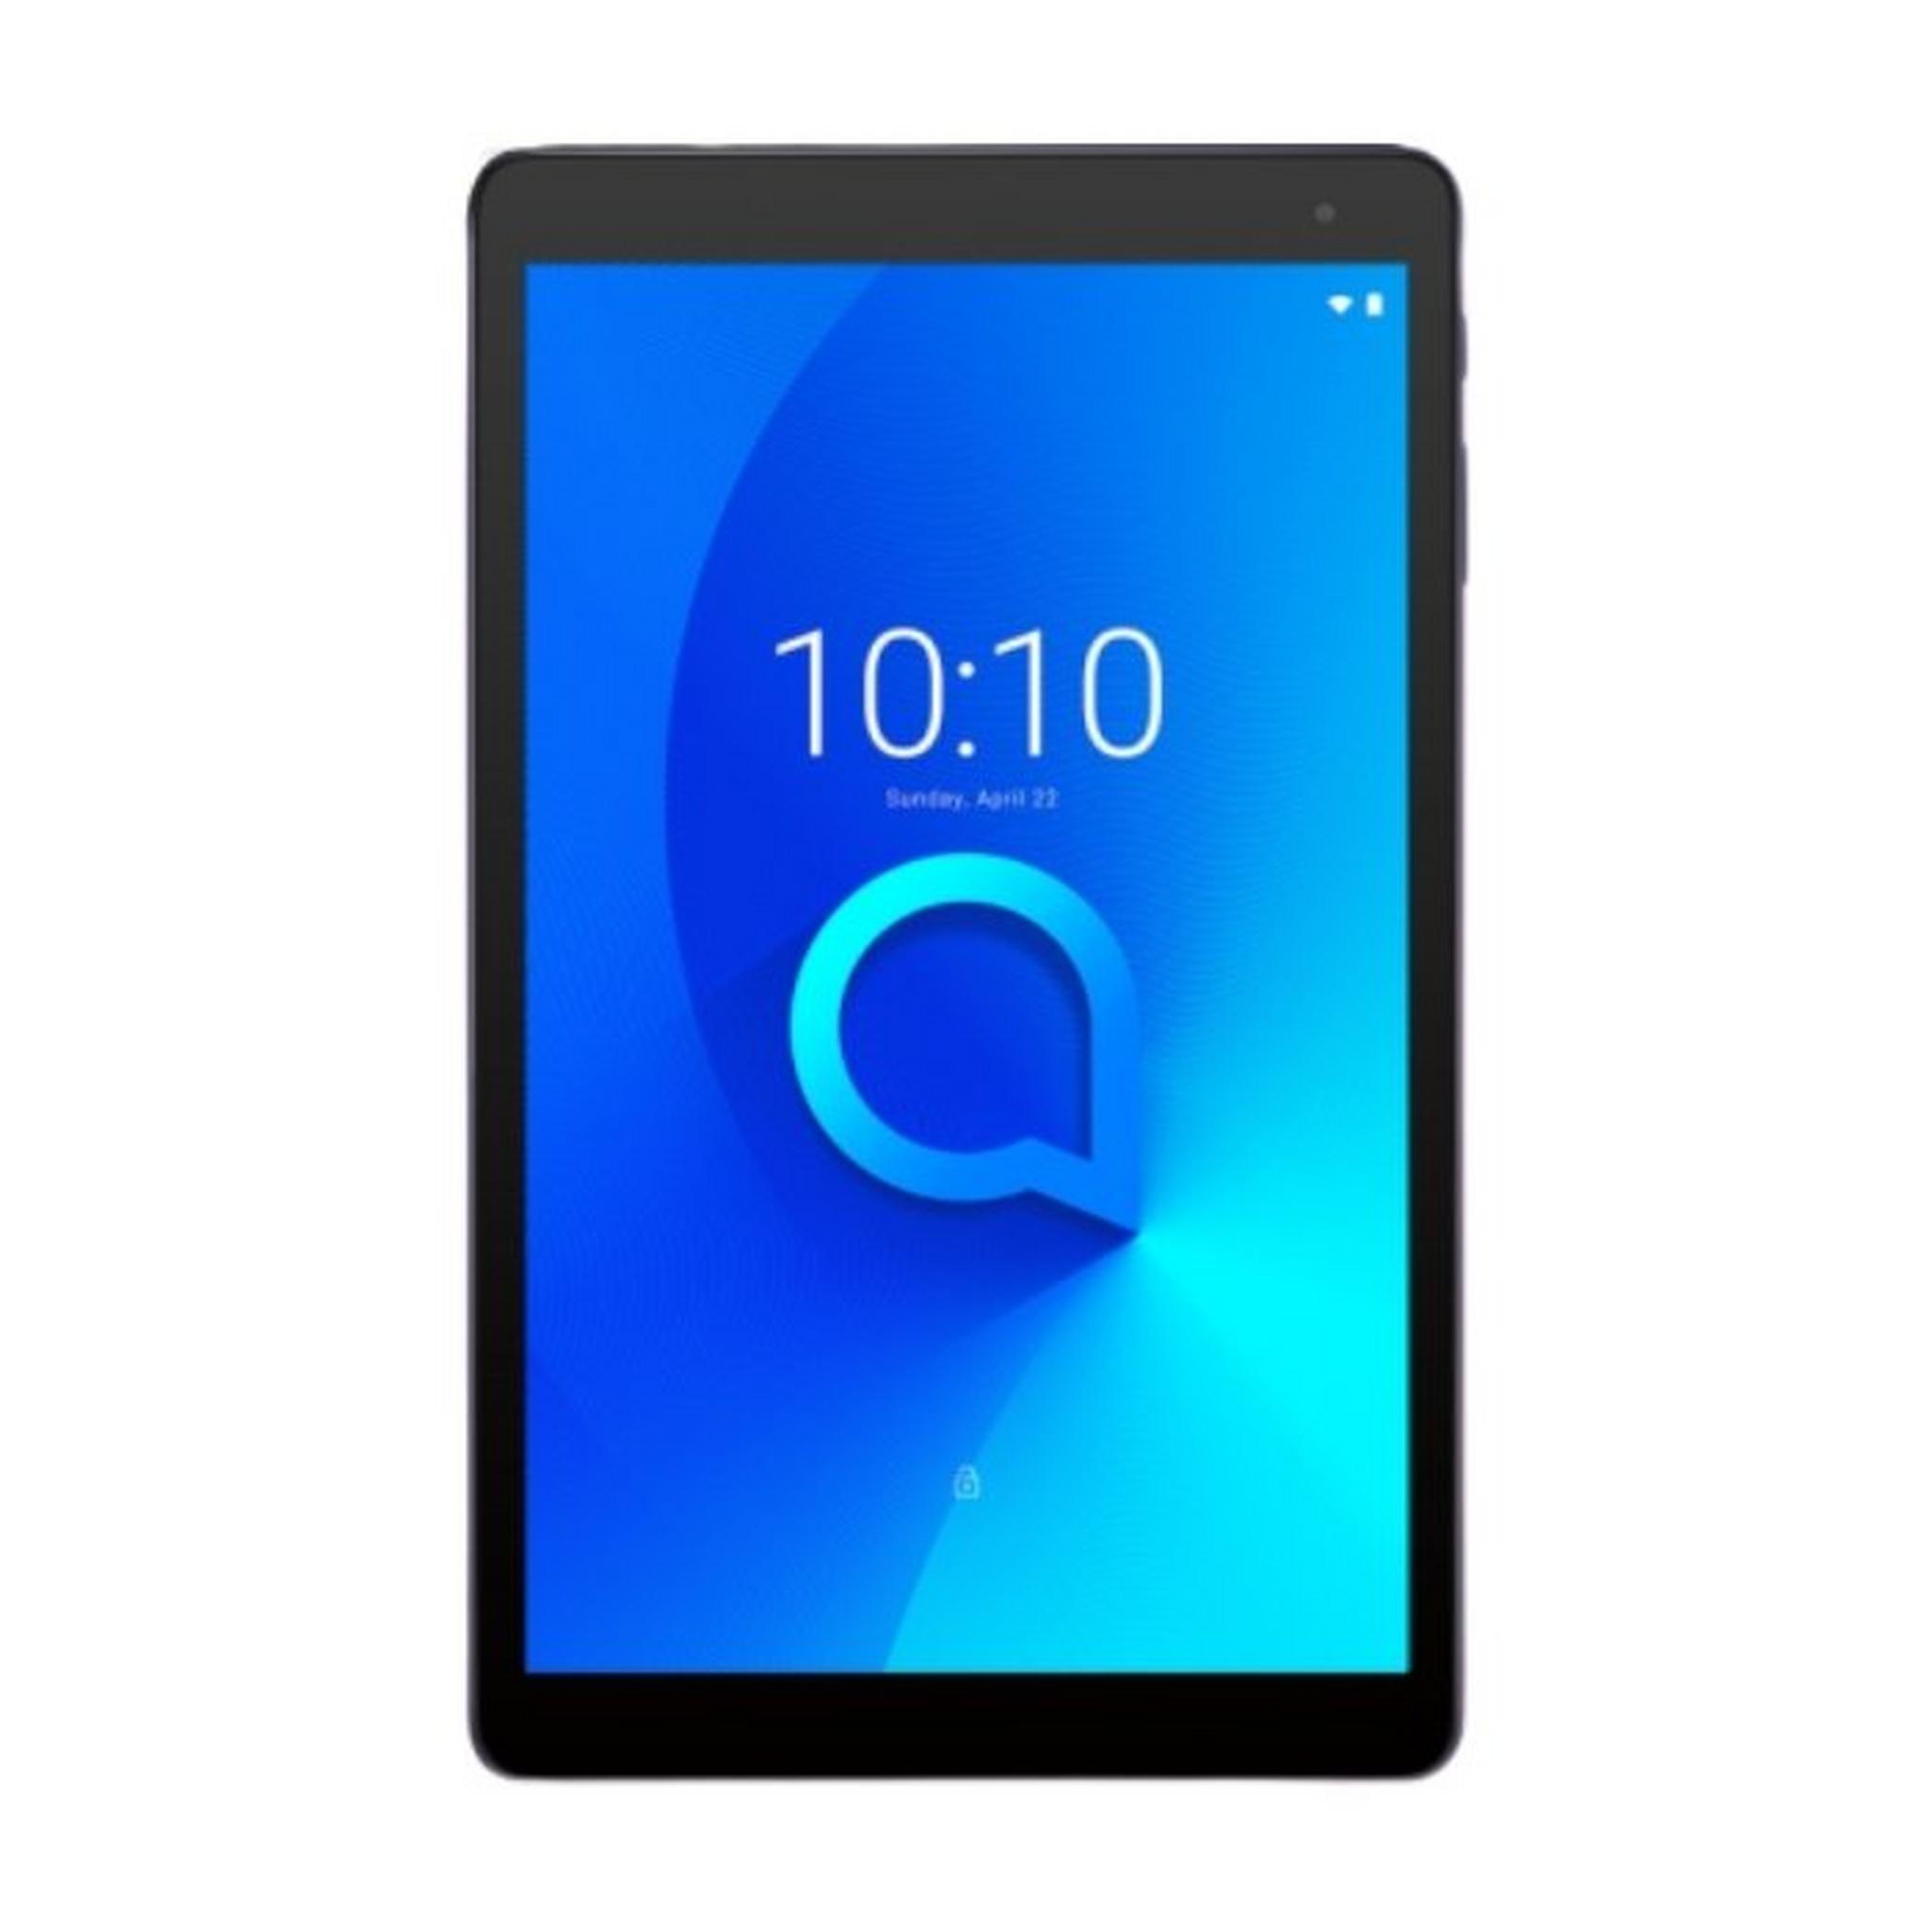 Alcatel 1T 7" 16GB 4G Tablet with Flip Cover - Black (9013T-2AALAV1)